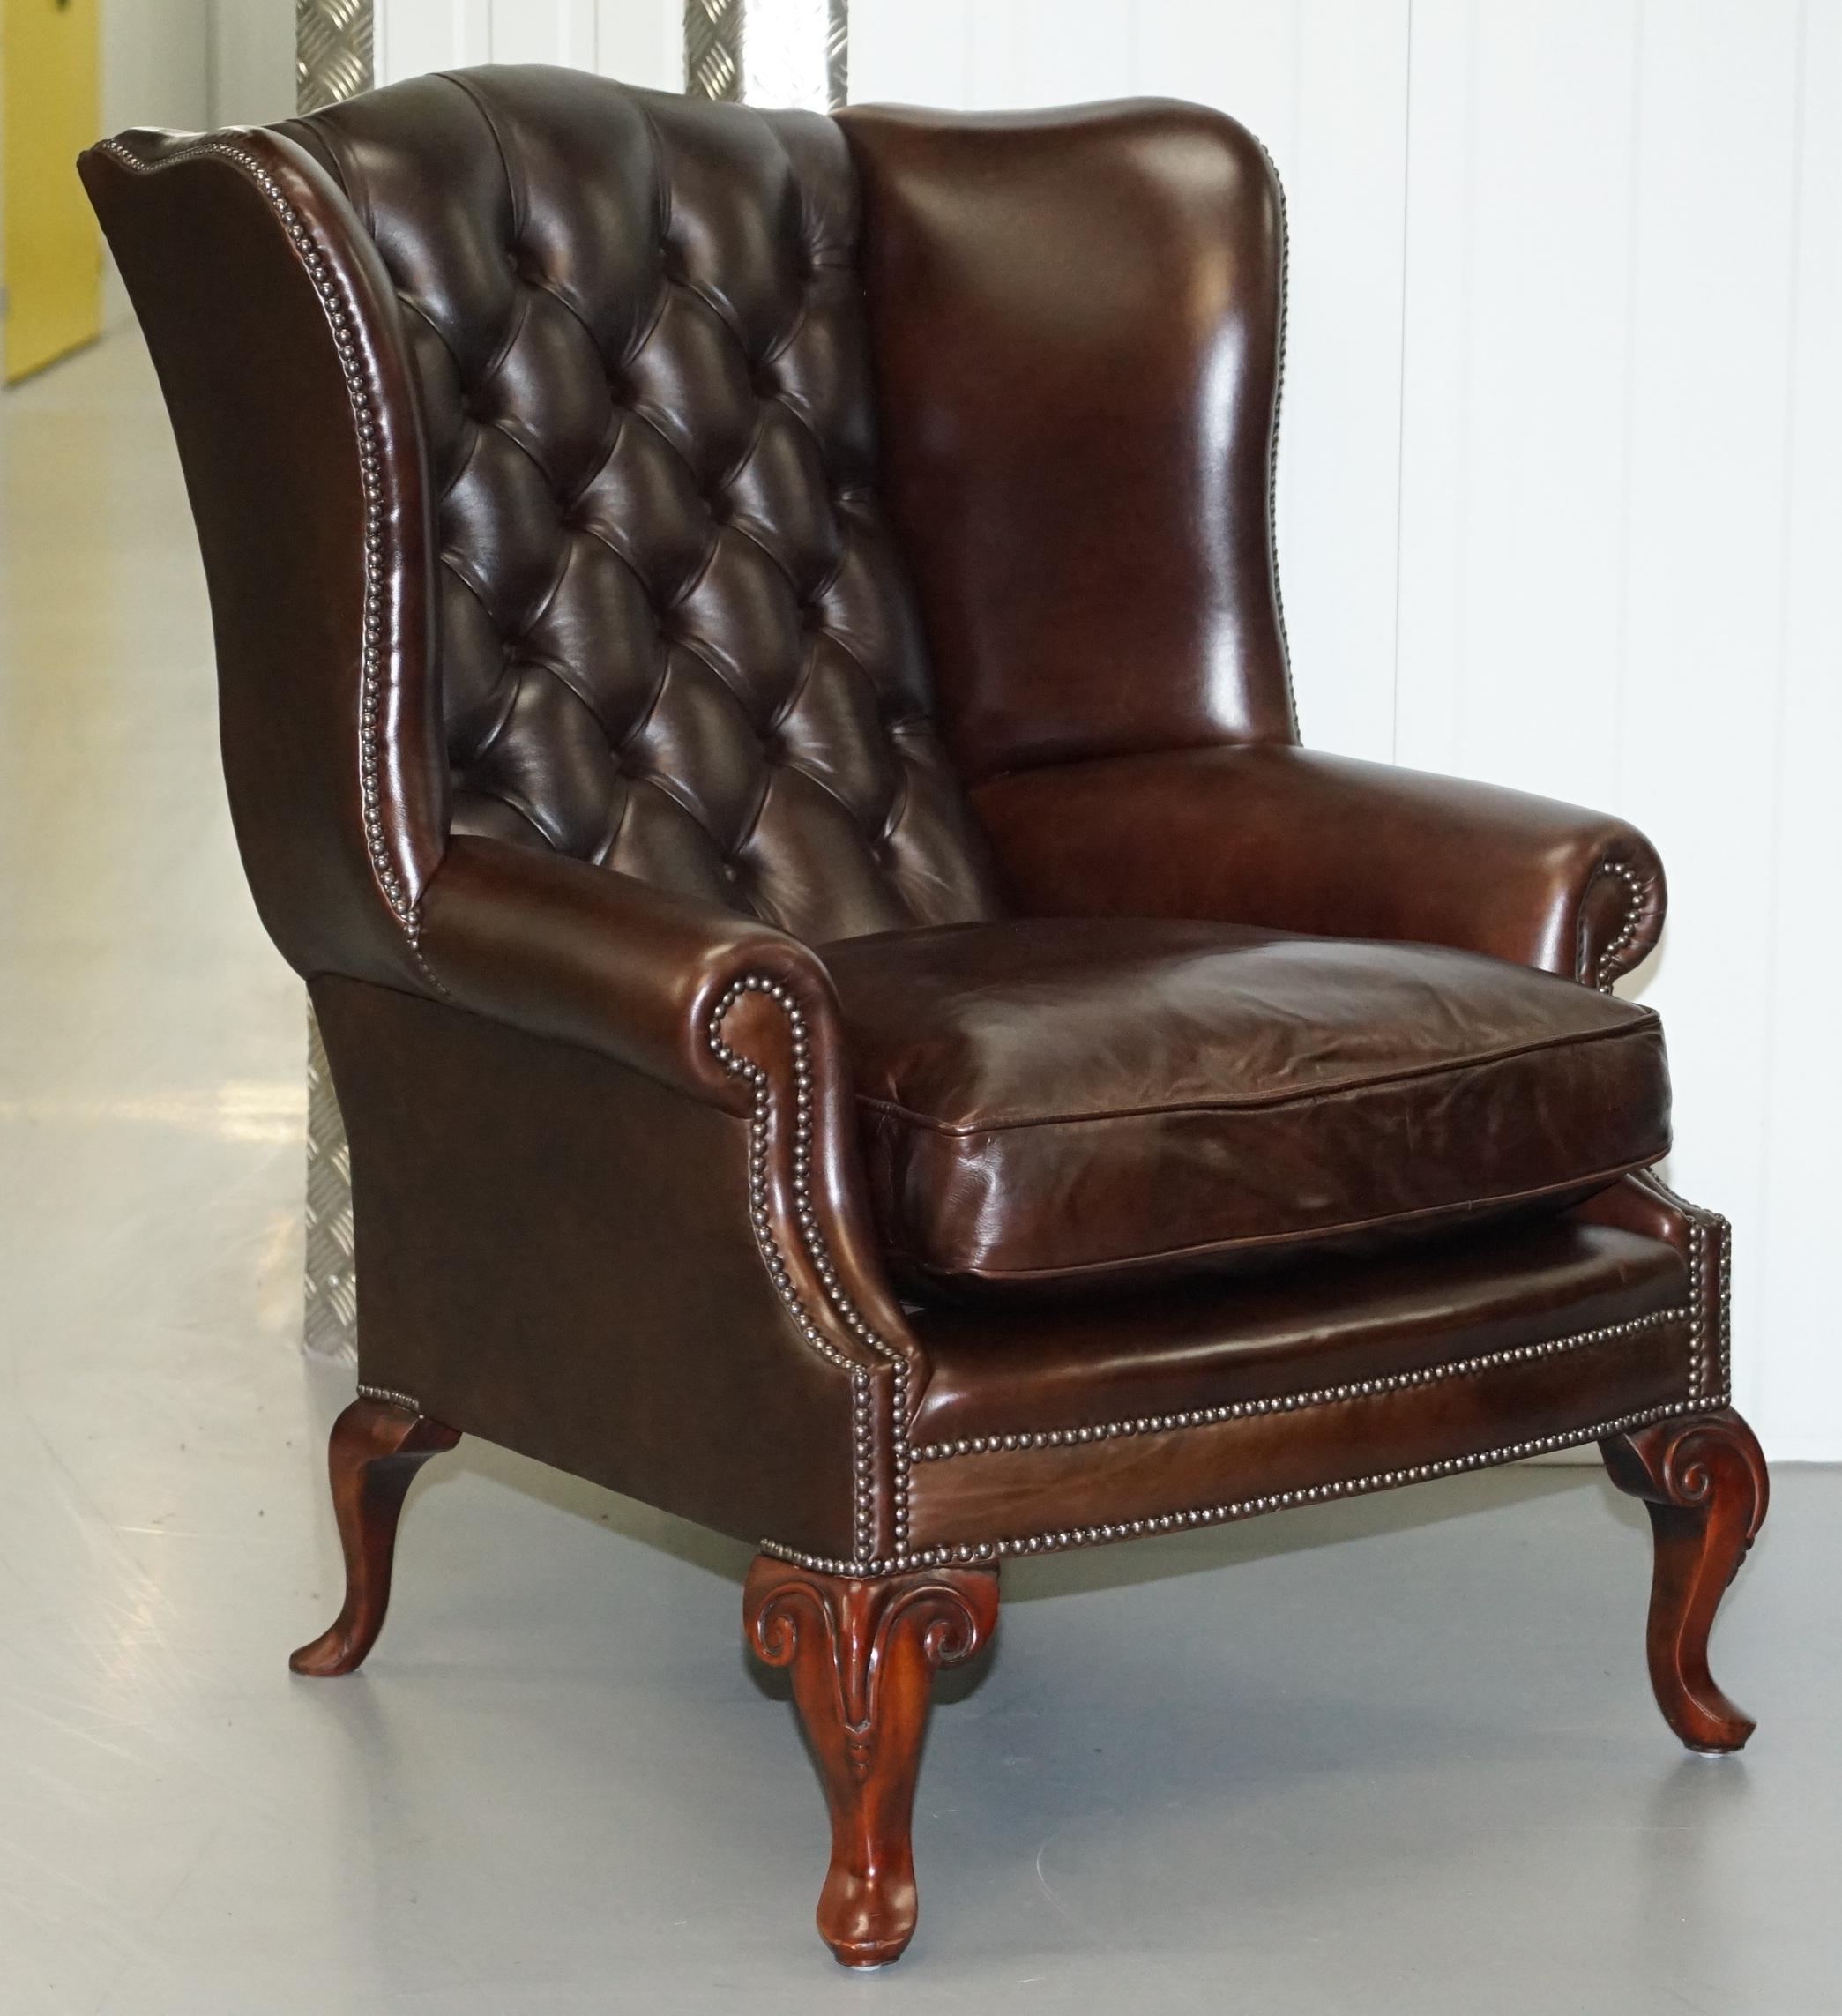 We are delighted to offer for sale this stunning pair of handmade Chesterfield very heavy brown leather wingback armchairs with ornately carved cabriolet legs and feather filled cushions

I have two pairs of these so four chairs in total for sale.